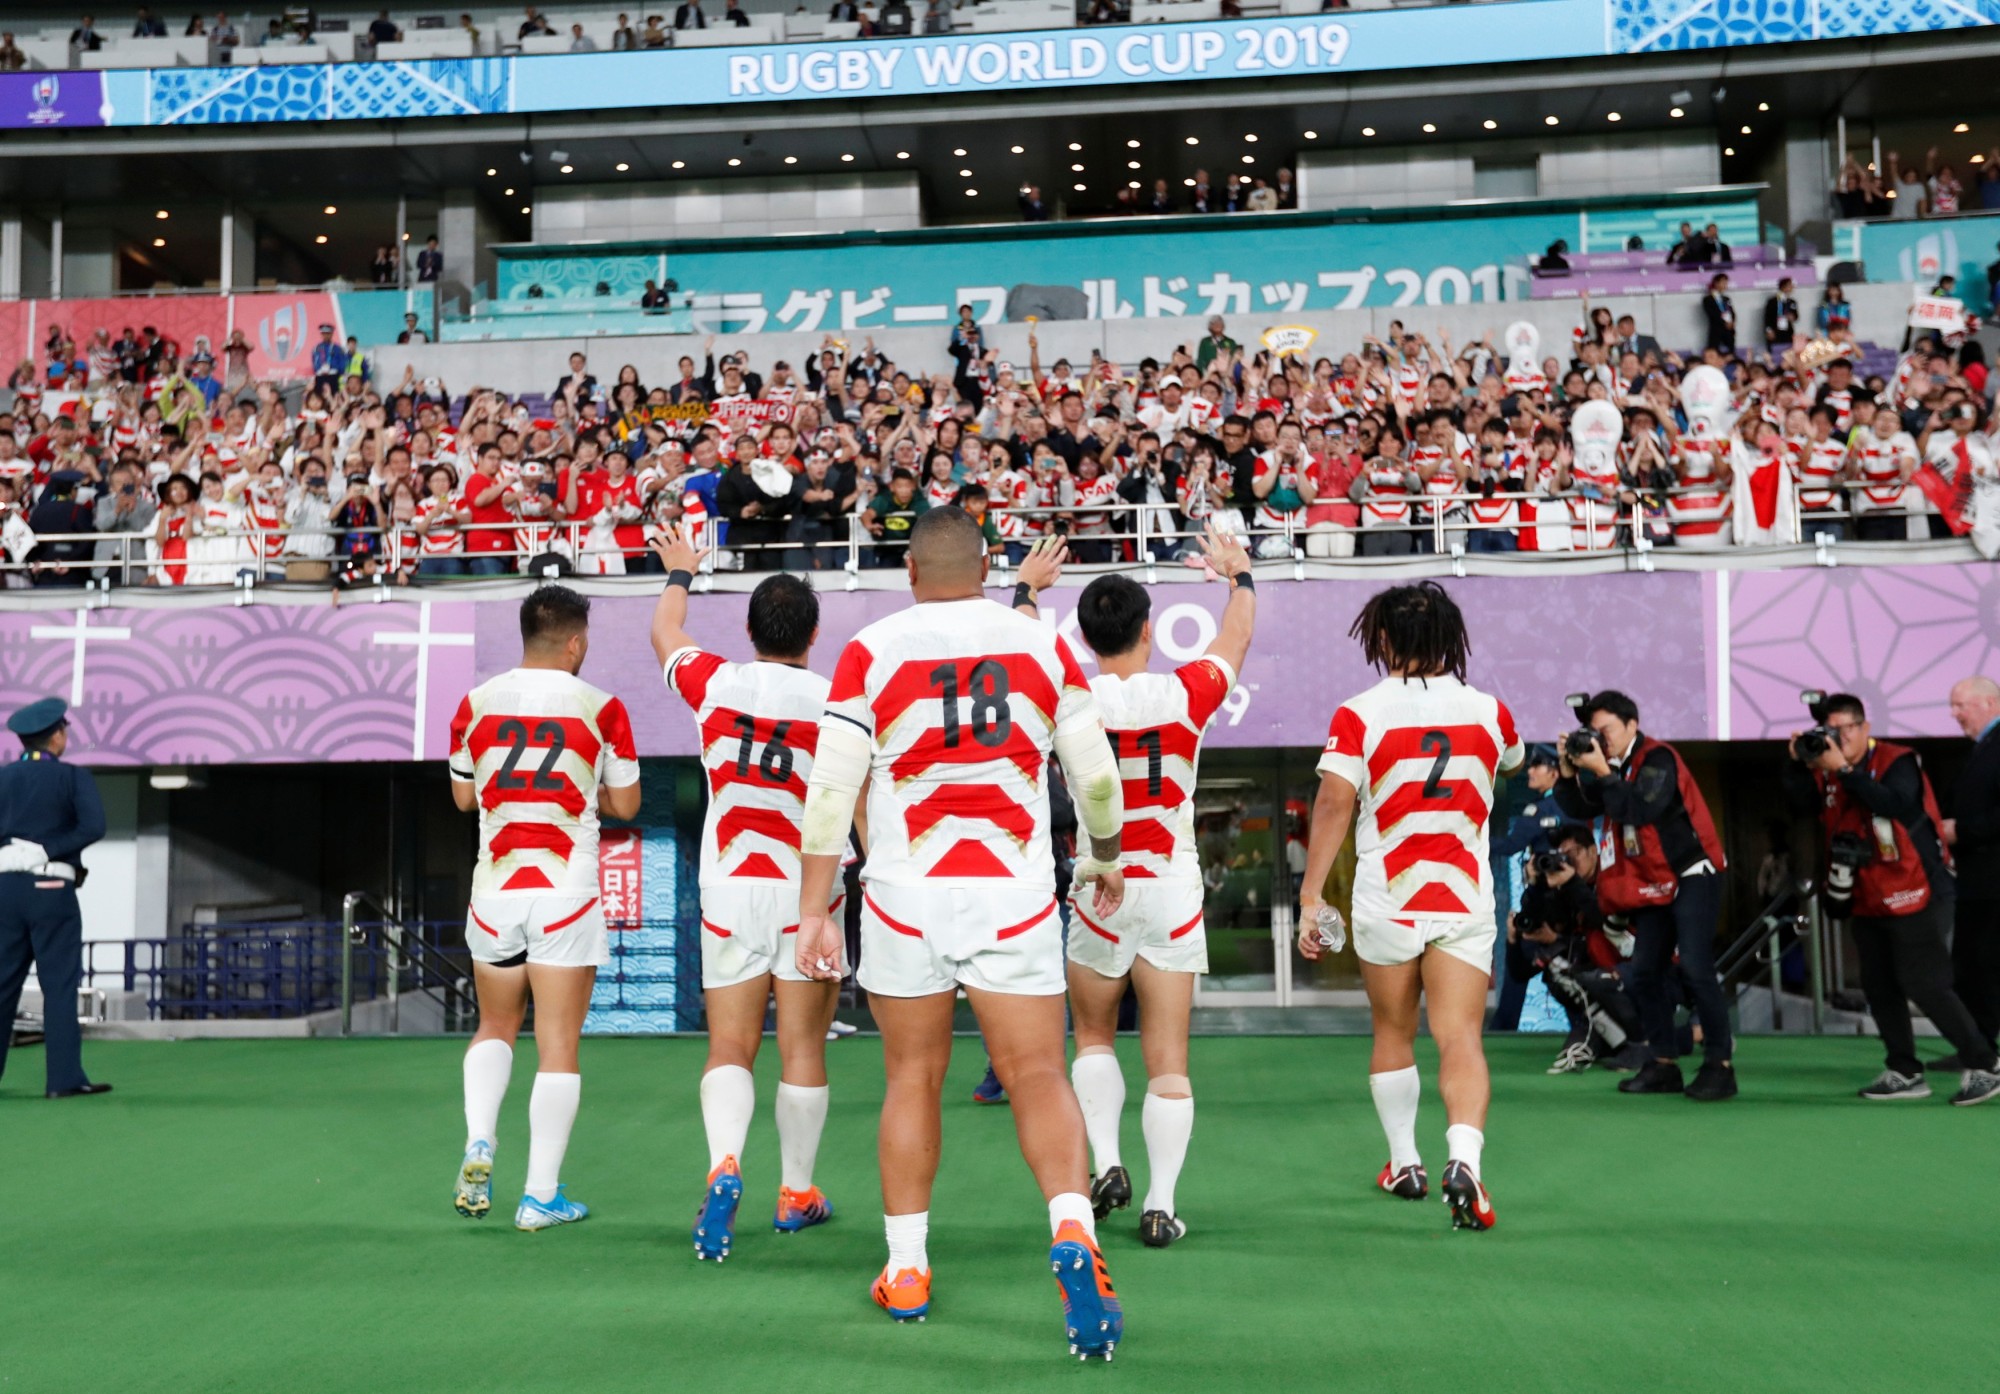 Japan's players return to the locker room after Sunday's Rugby World Cup quarterfinal at Tokyo Stadium. | REUTERS